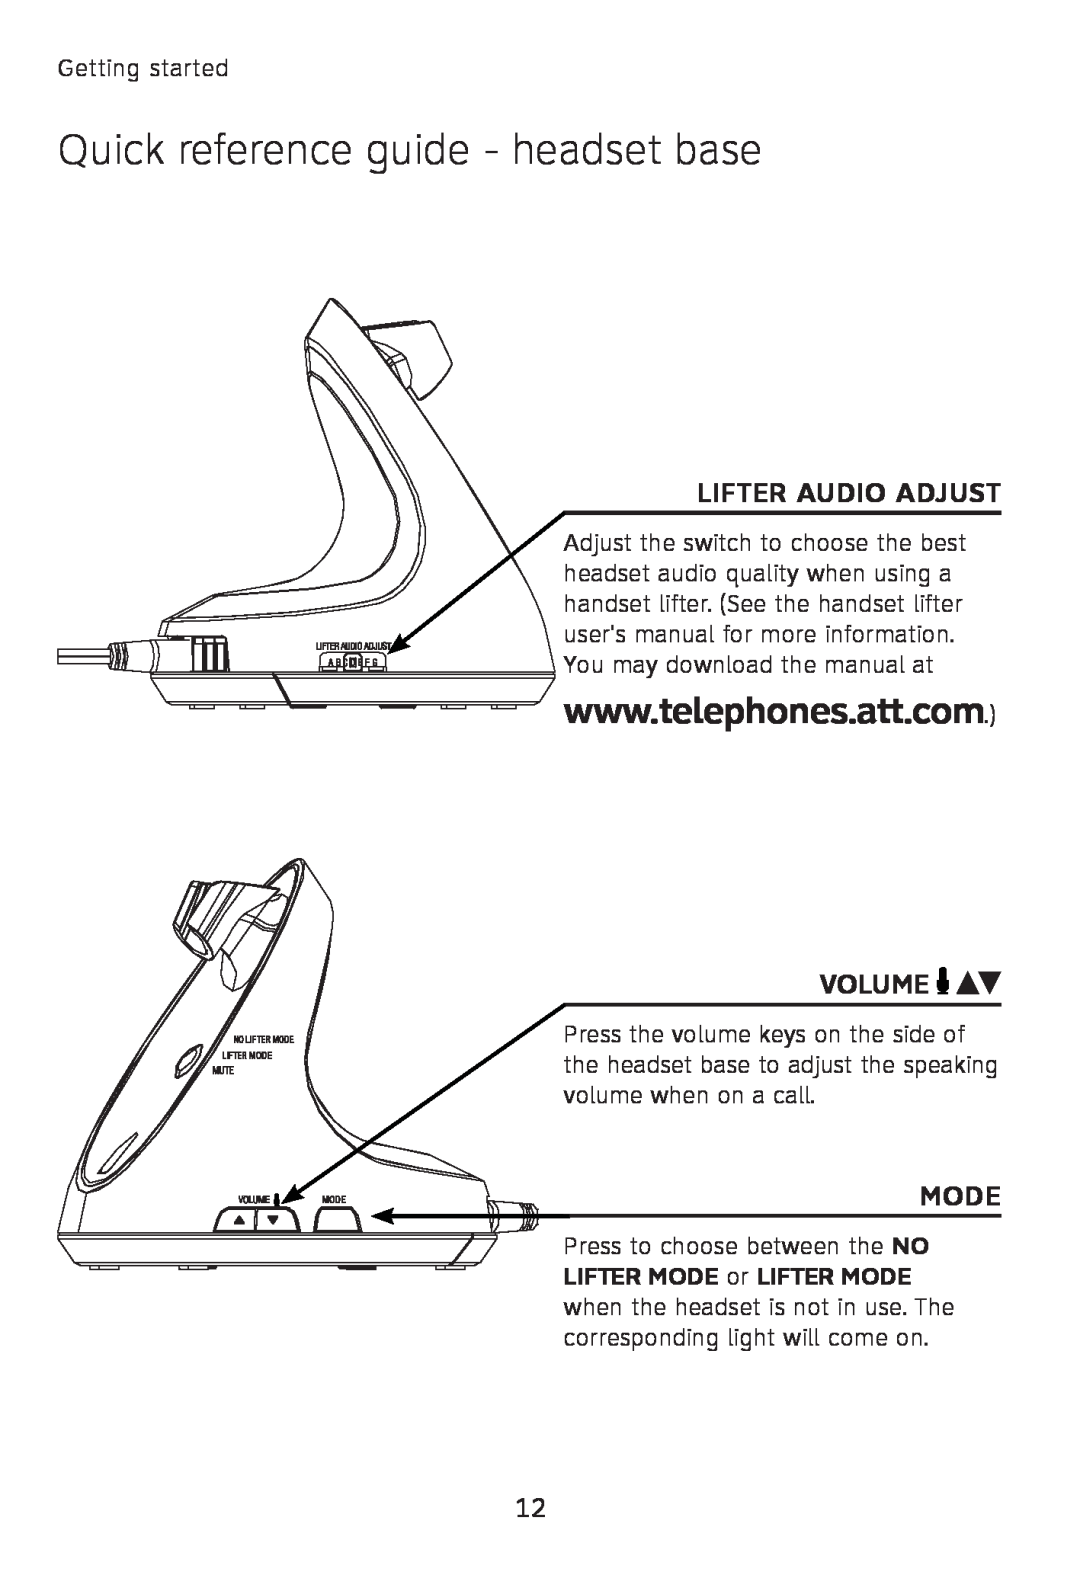 AT&T TL760 quick start Quick reference guide - headset base, Lifter Audio Adjust, Volume, Mode 